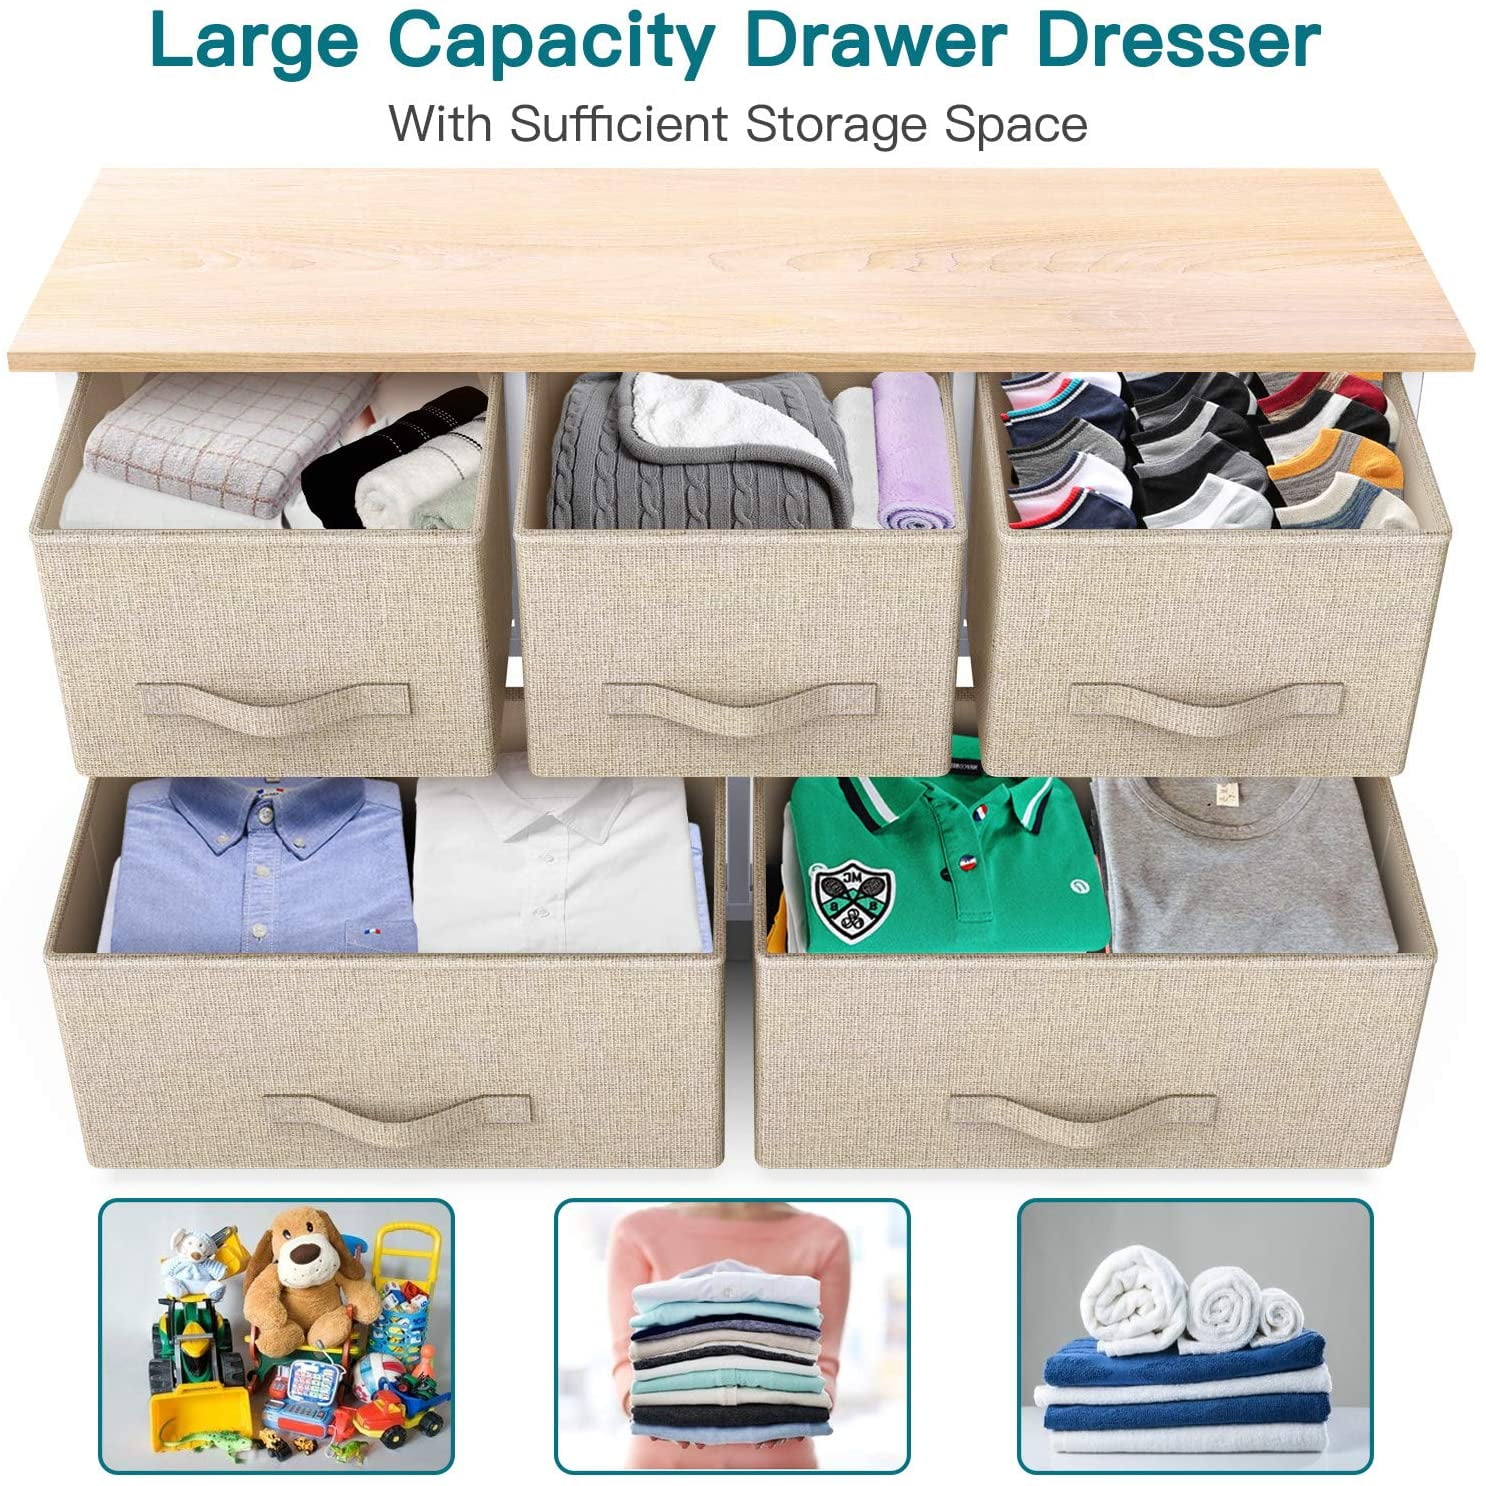 Crestlive Products Fabric Dresser for Bedroom, Storage Tower with 8 Drawers, Organizer Unit for Bedroom, Hallway, Nursery, Entry